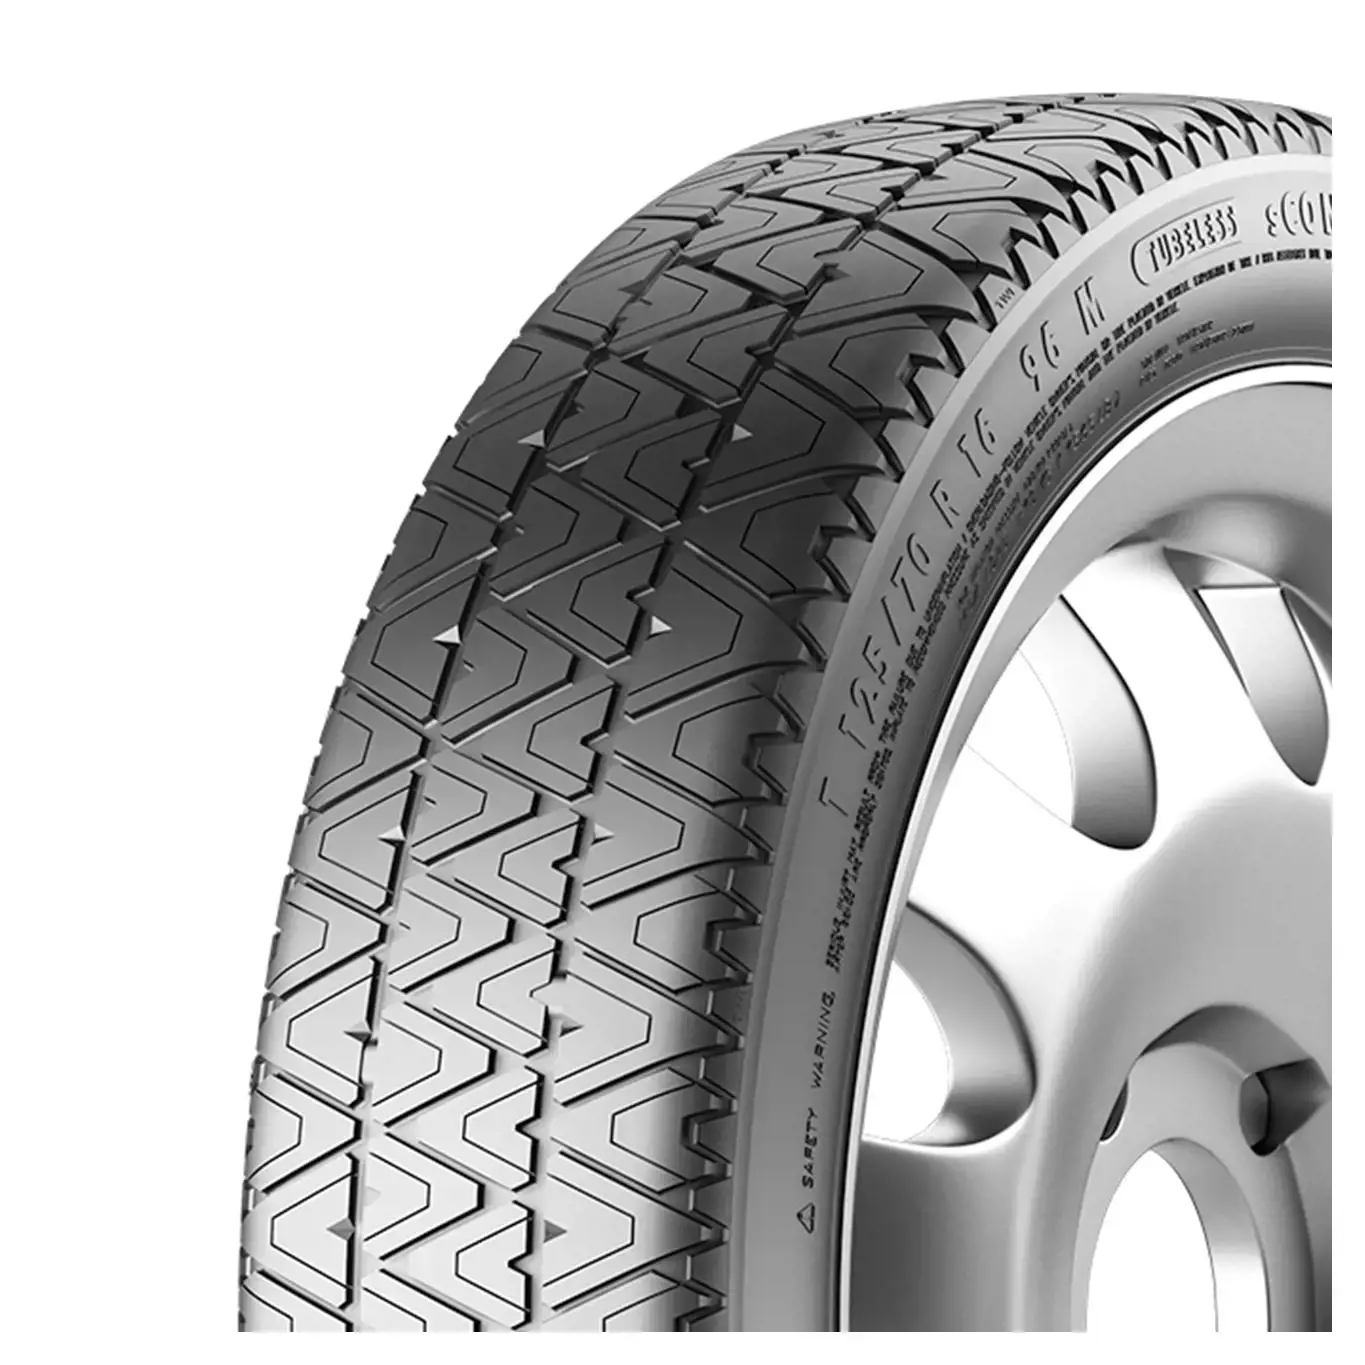 T115/70 R15 90M sContact